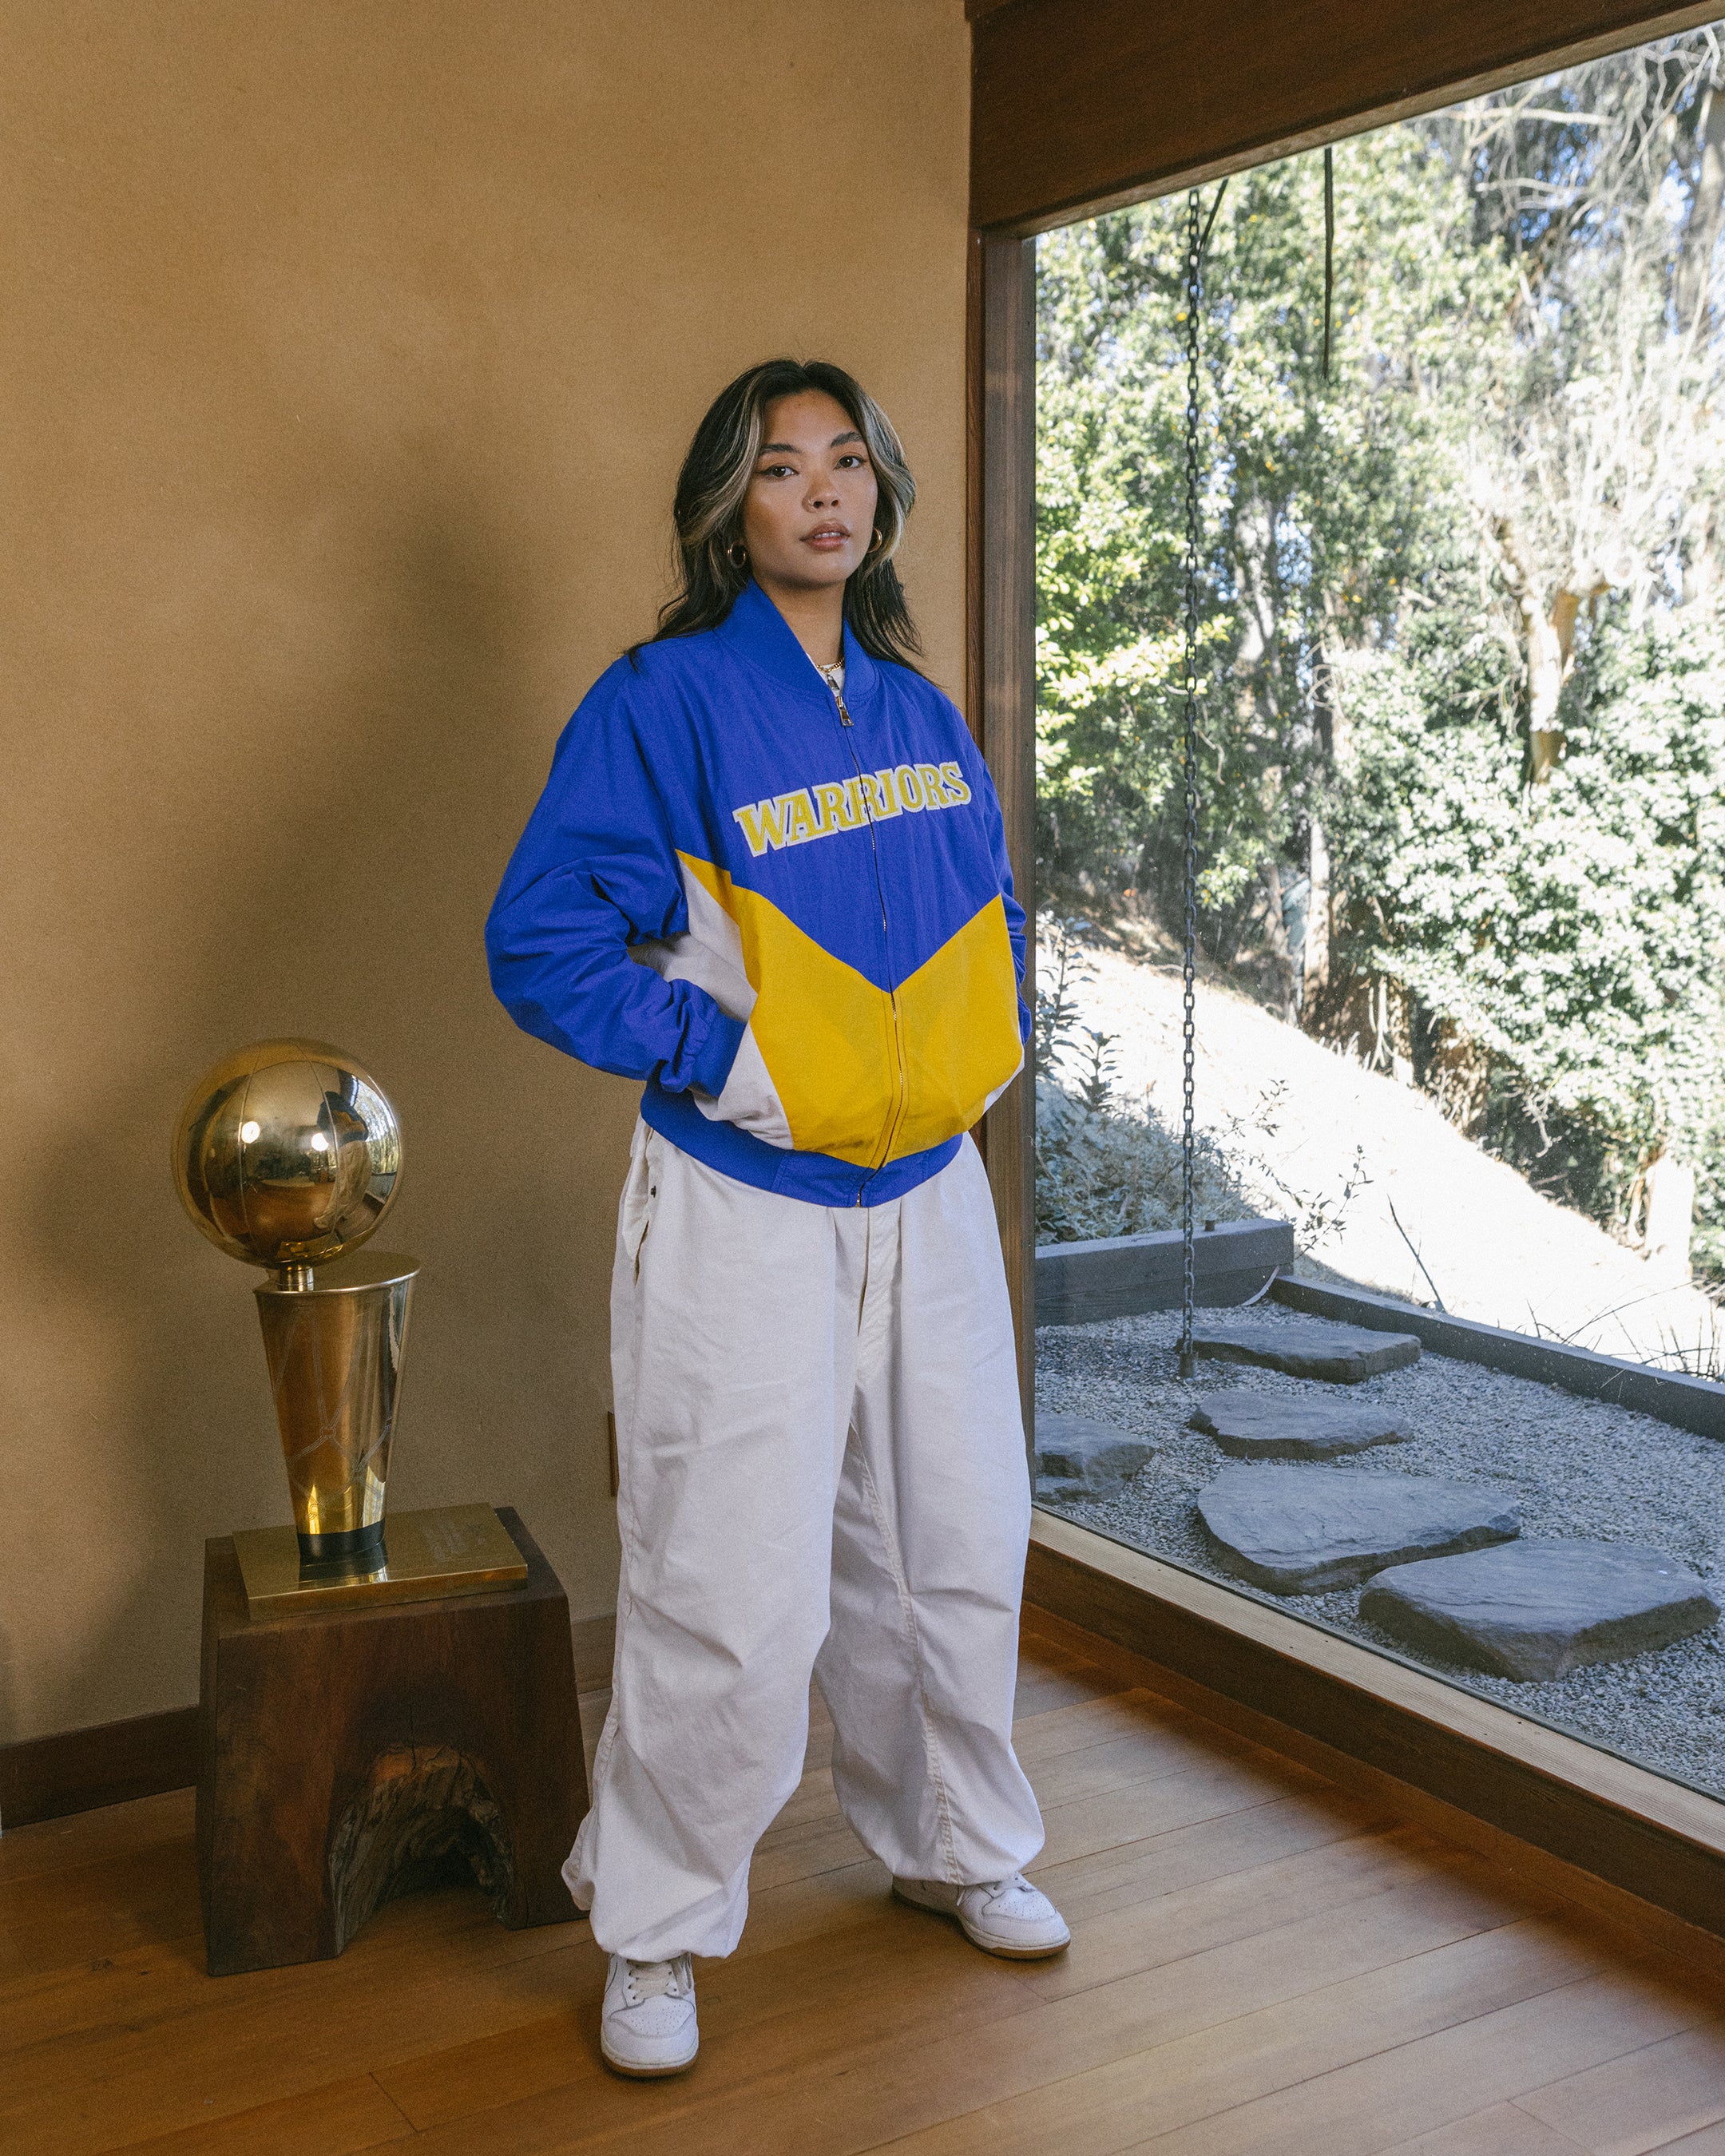 FW22 AUTHMADE / GOLDEN STATE WARRIORS – Authmade